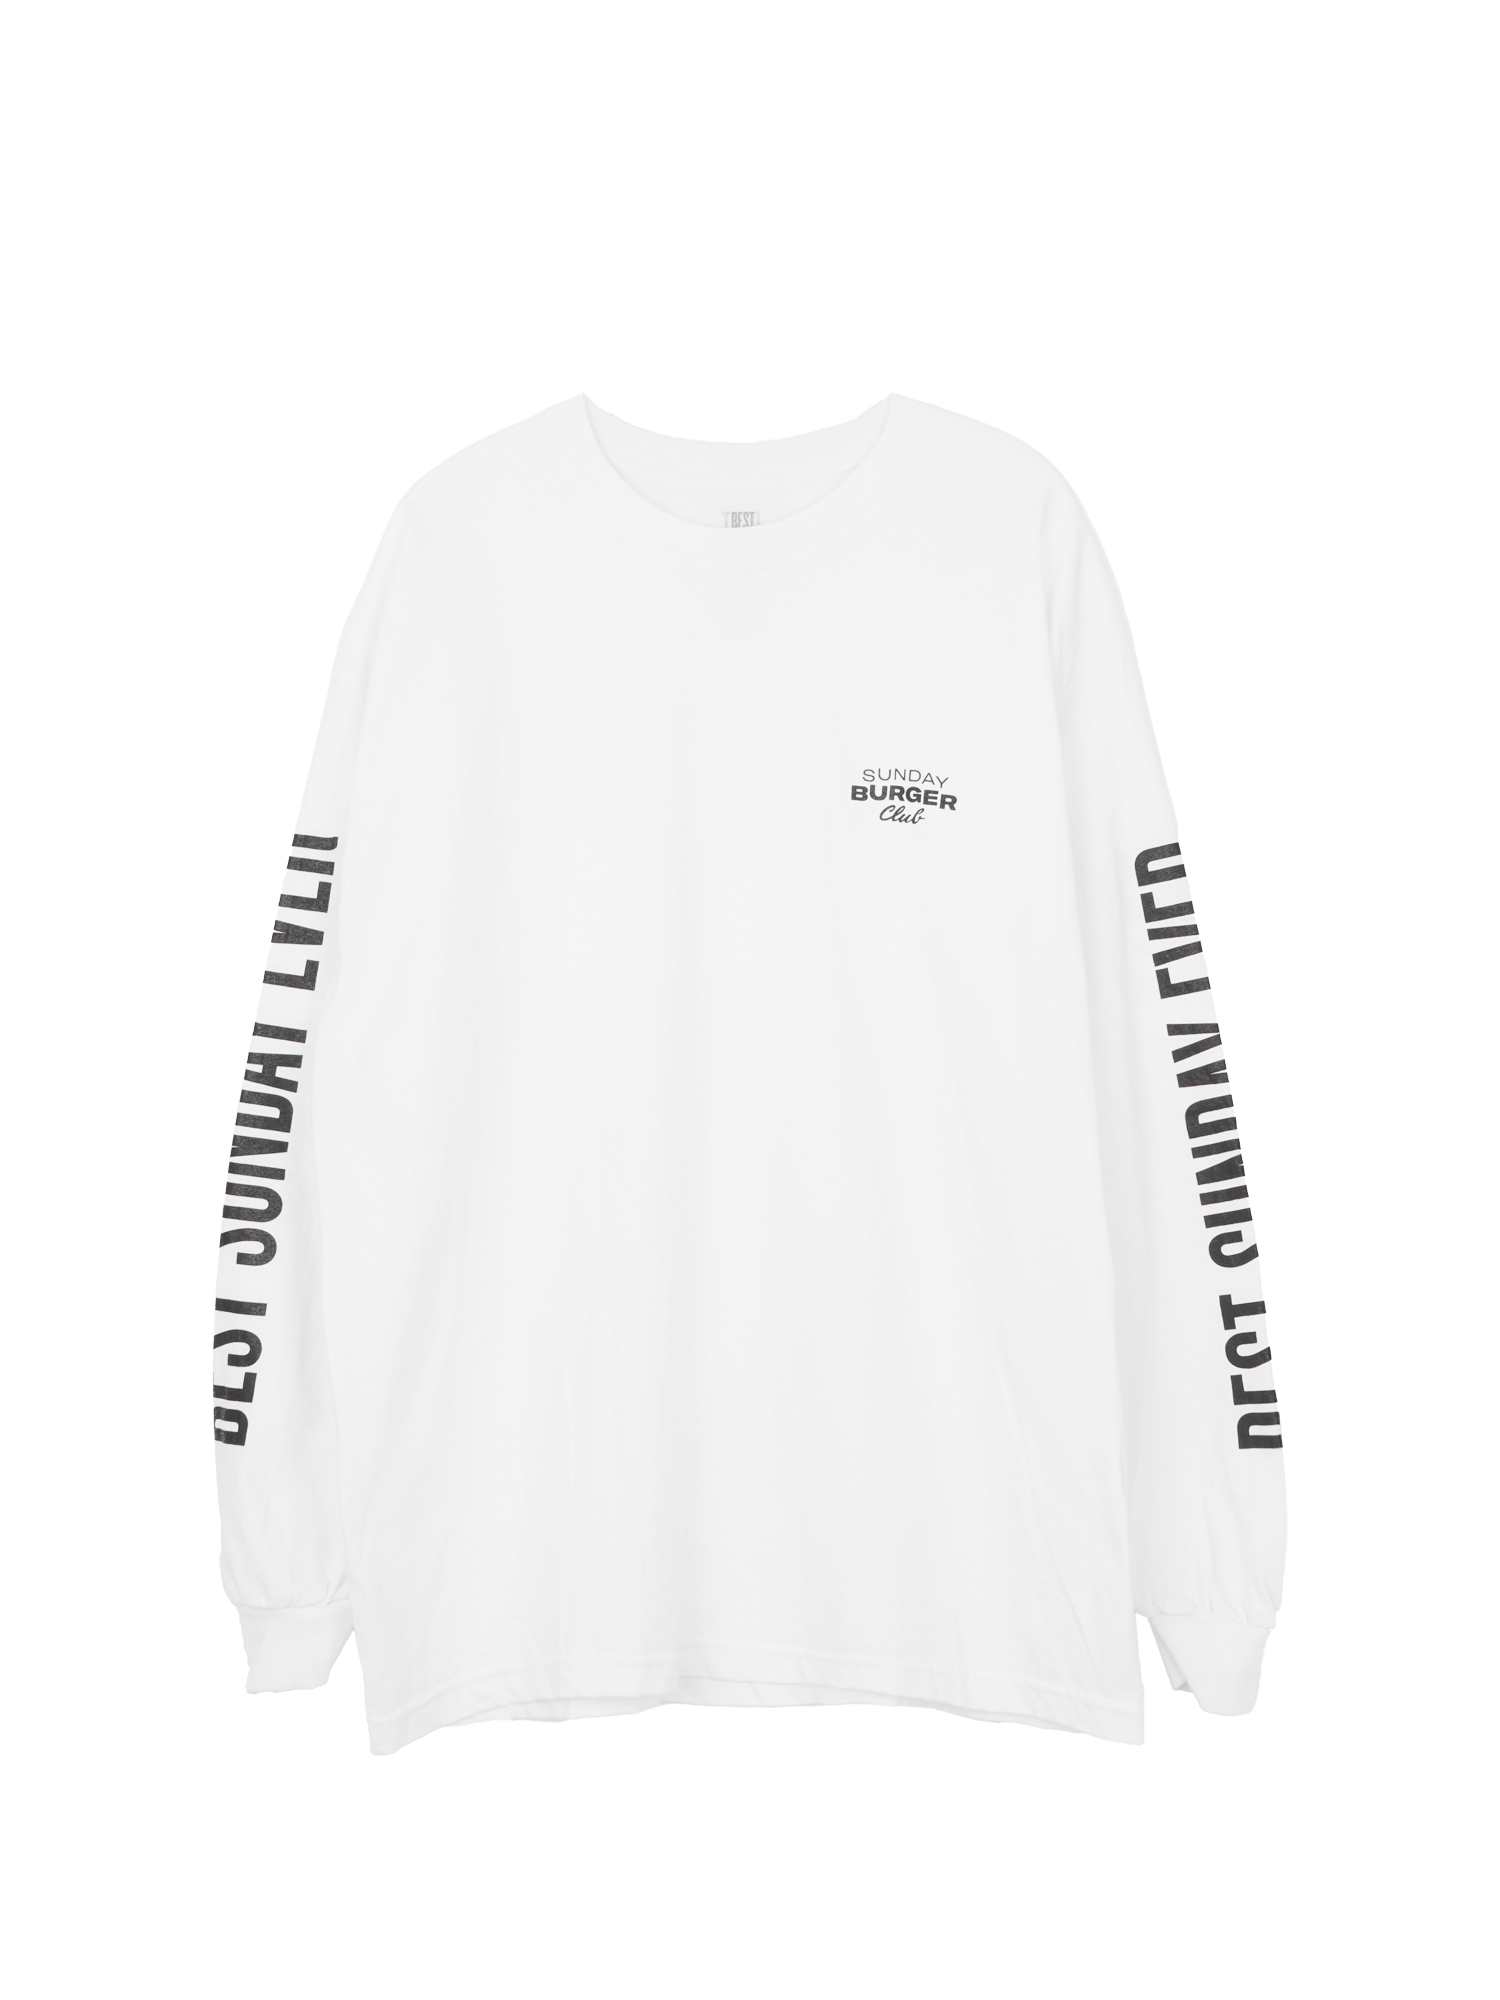 BSE Side White T-Shirts - Long Sleeve